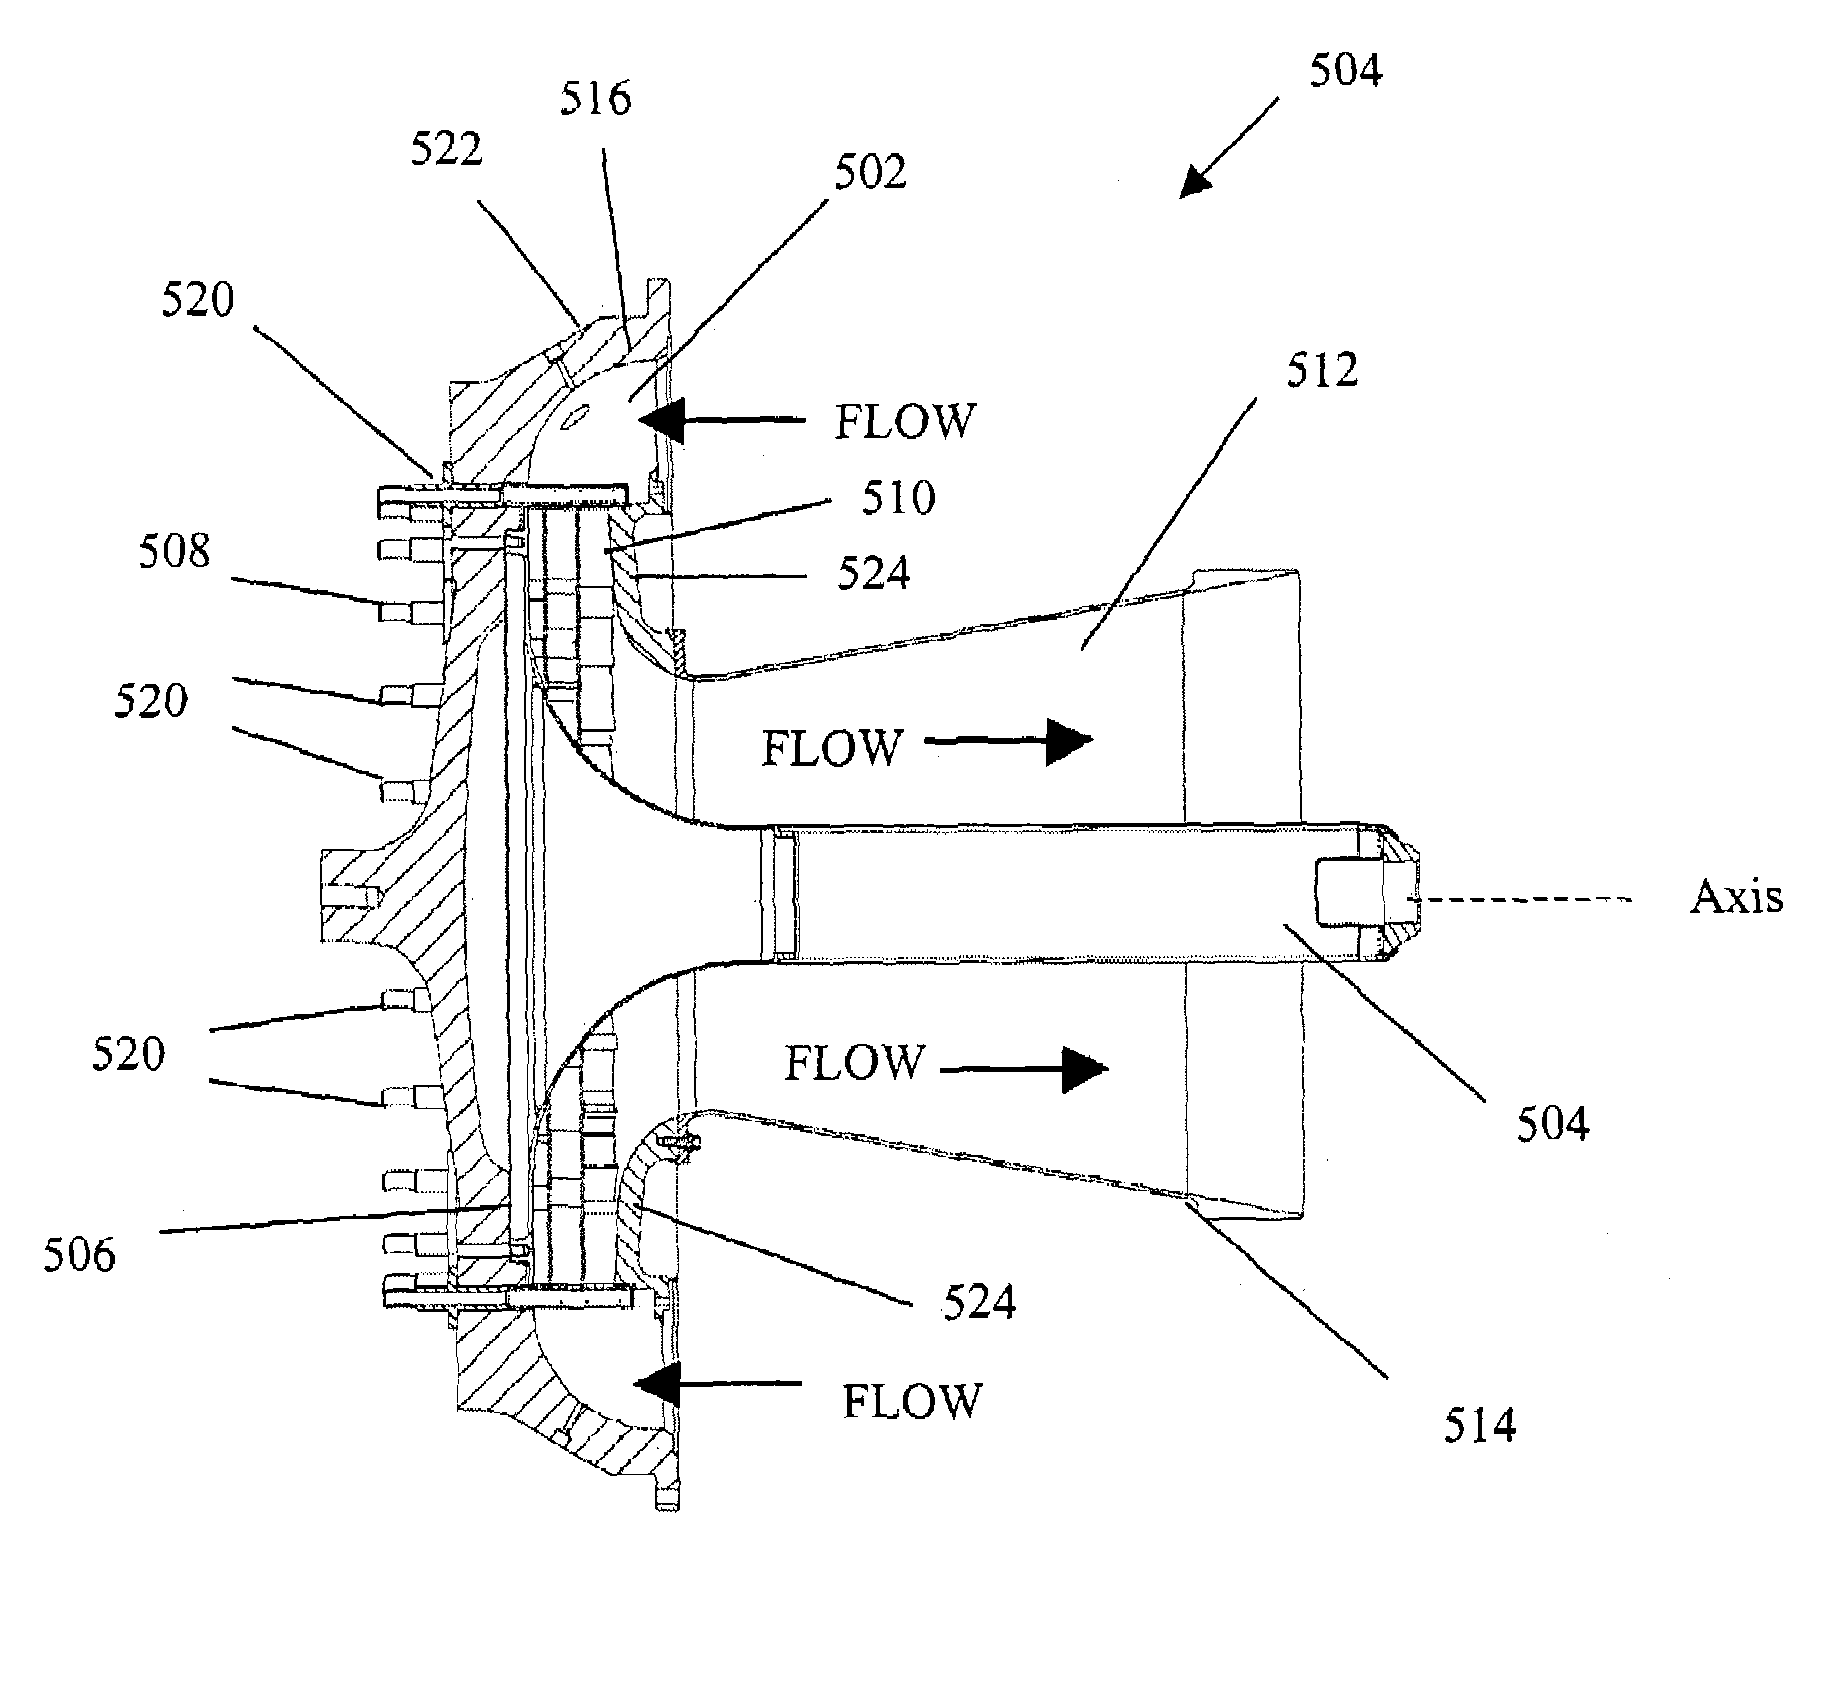 Fuel-air premixing system for a catalytic combustor